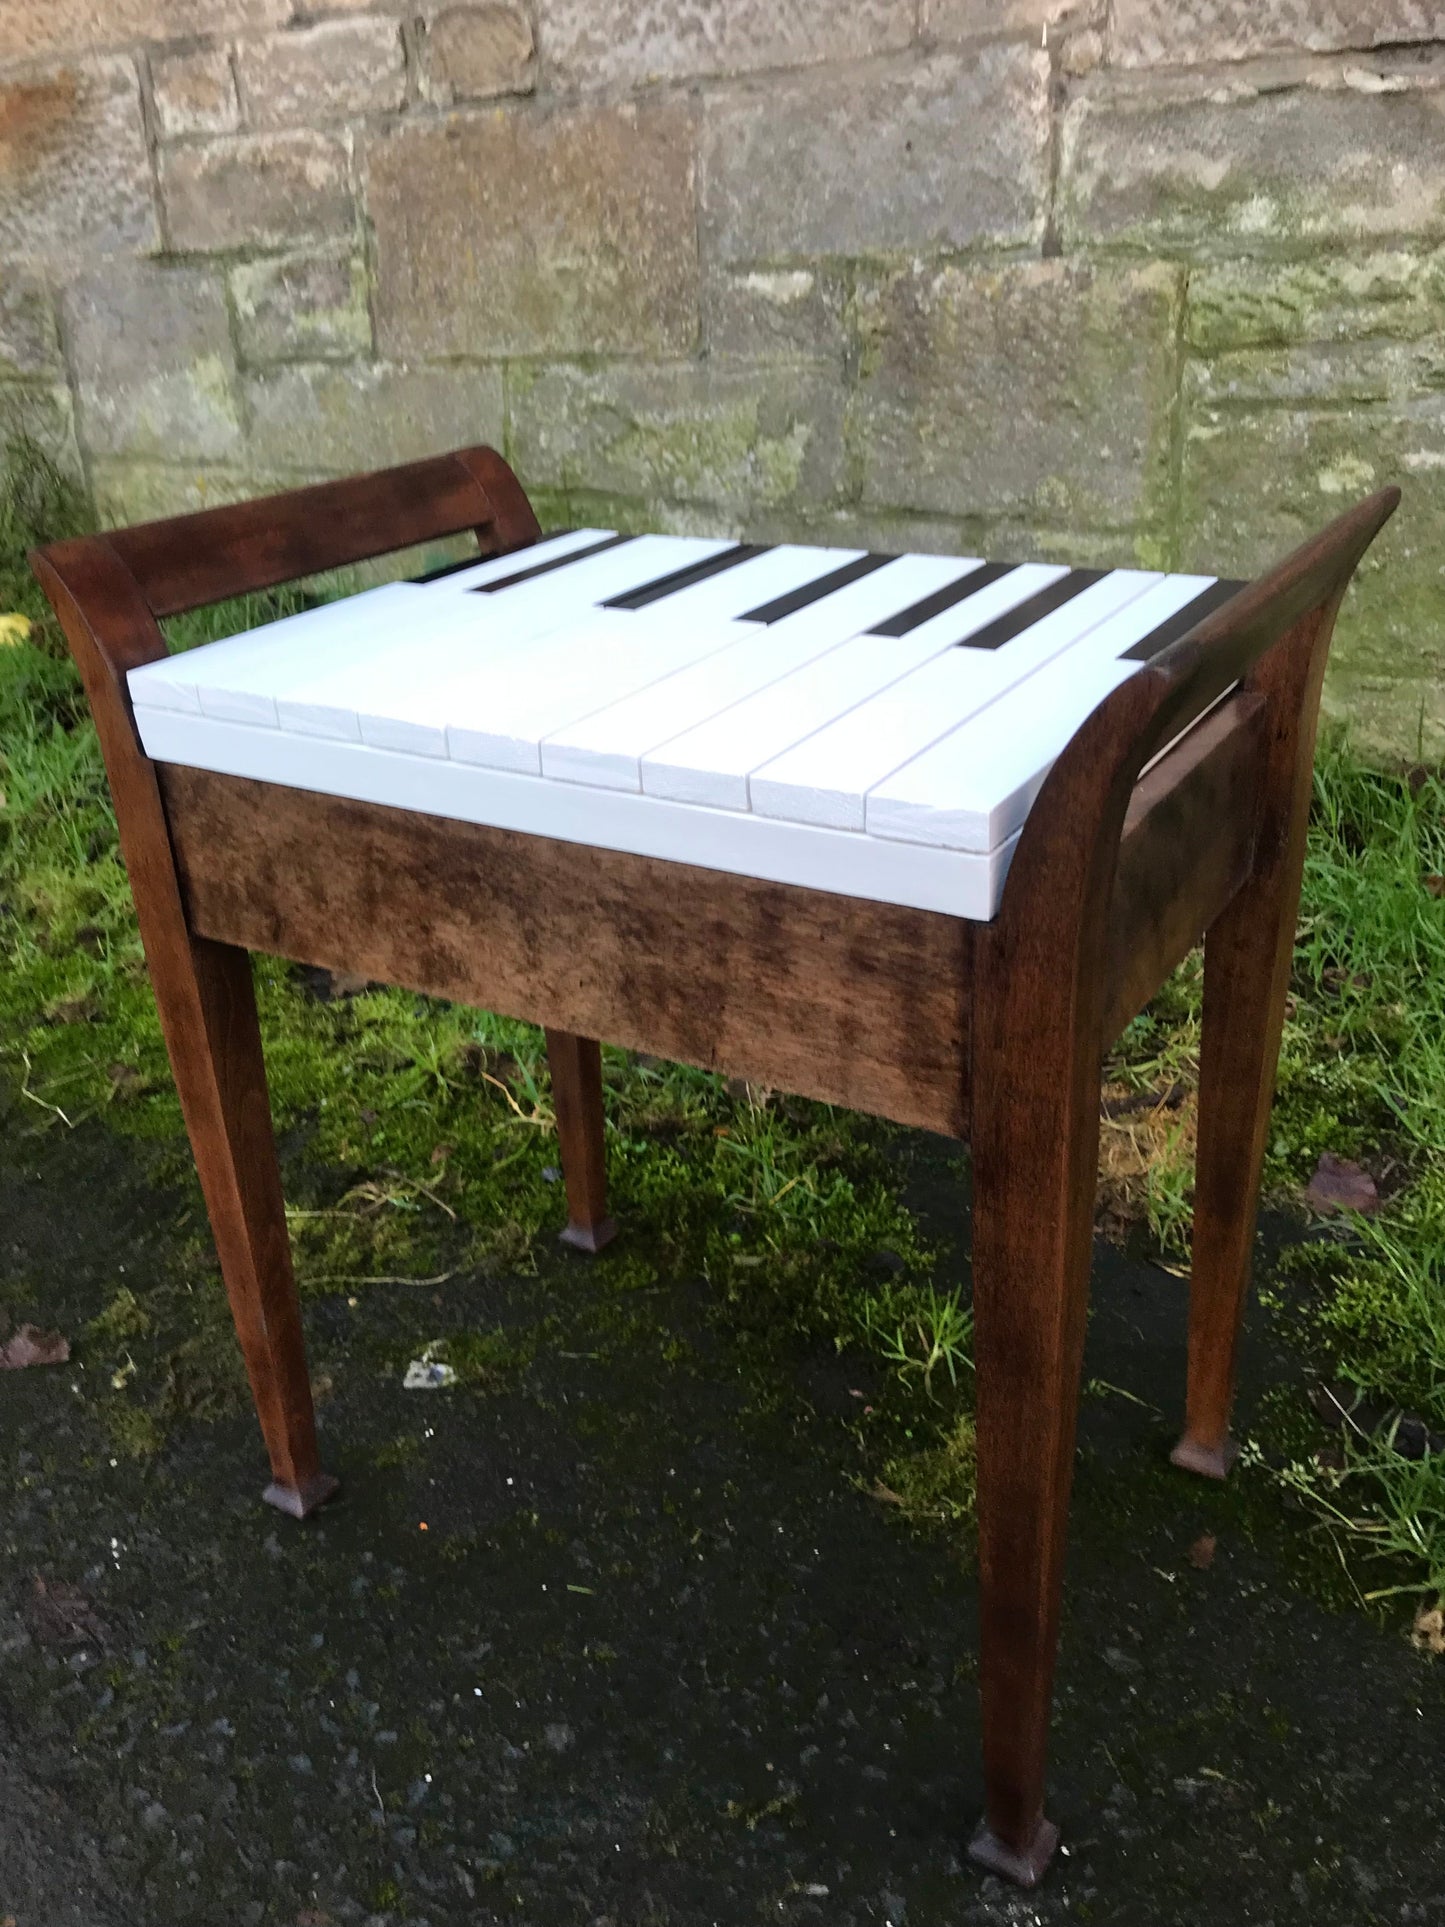 Upcycled vintage Piano stools